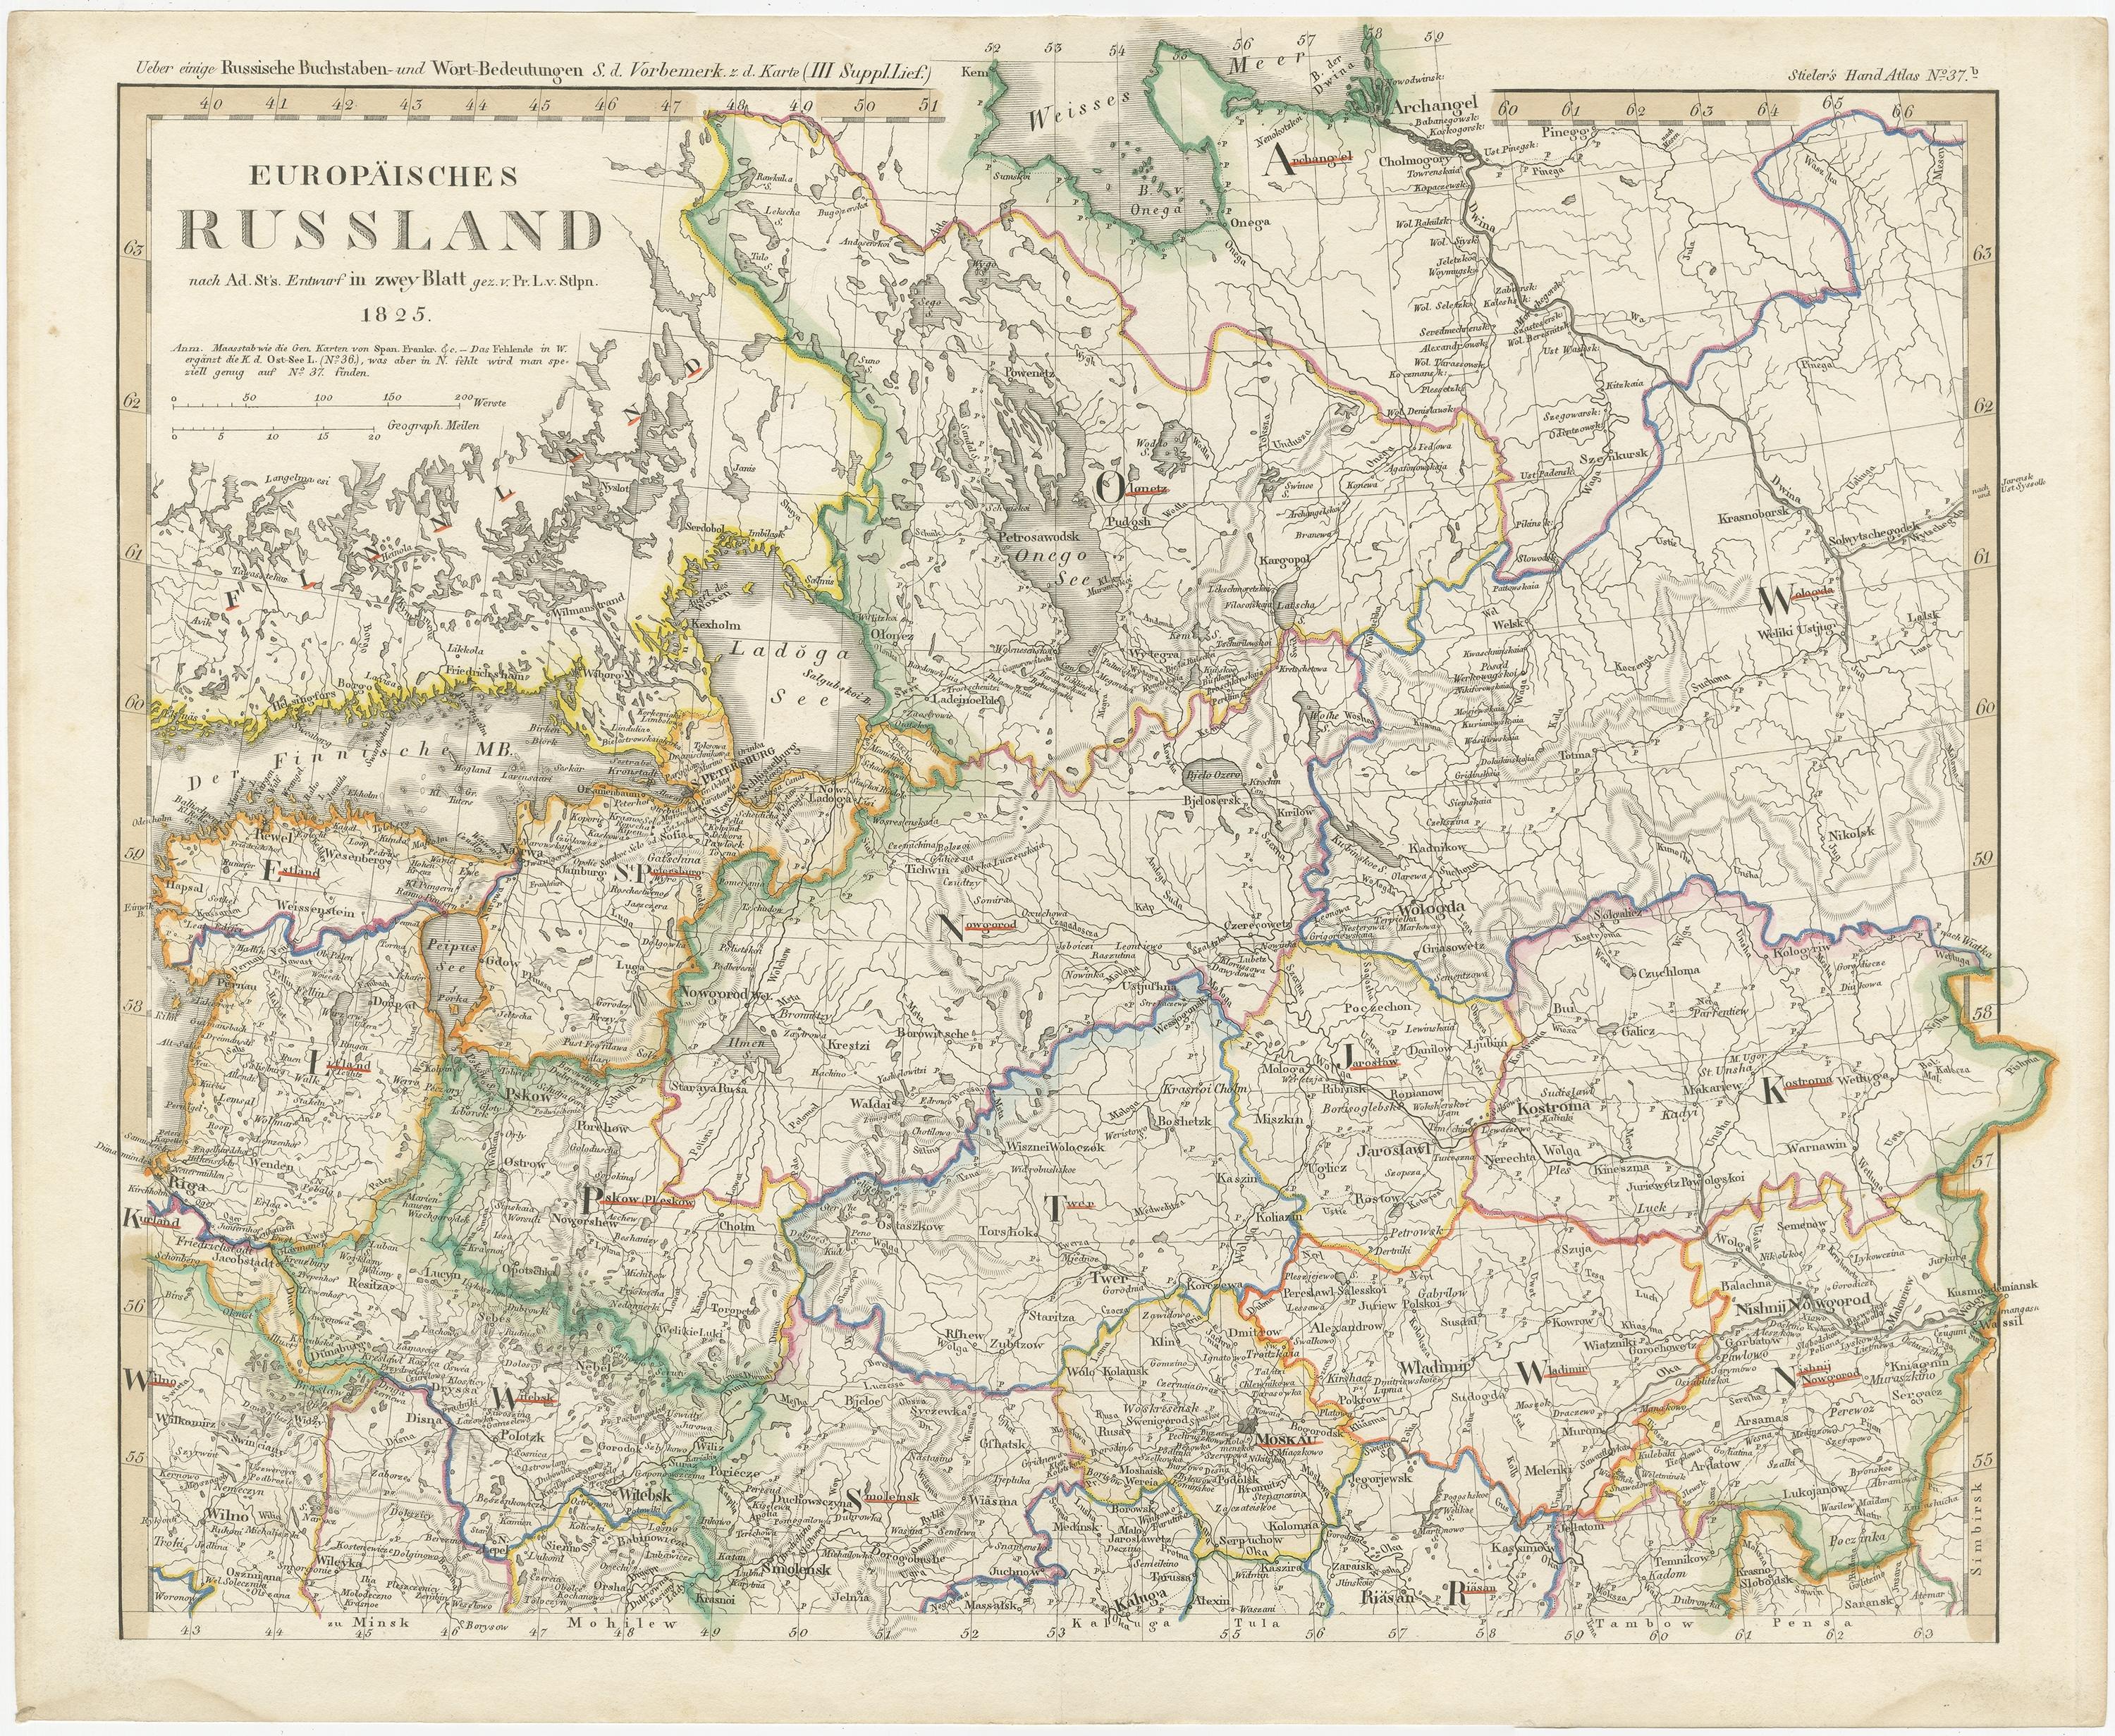 Description: Antique map titled 'Europäisches Russland'. 

Two individuel sheets, joined together they depict Russia in Europe. These maps originate from 'Stielers Handatlas'. Published circa 1825. 

Artists and Engravers: Stielers Handatlas (after